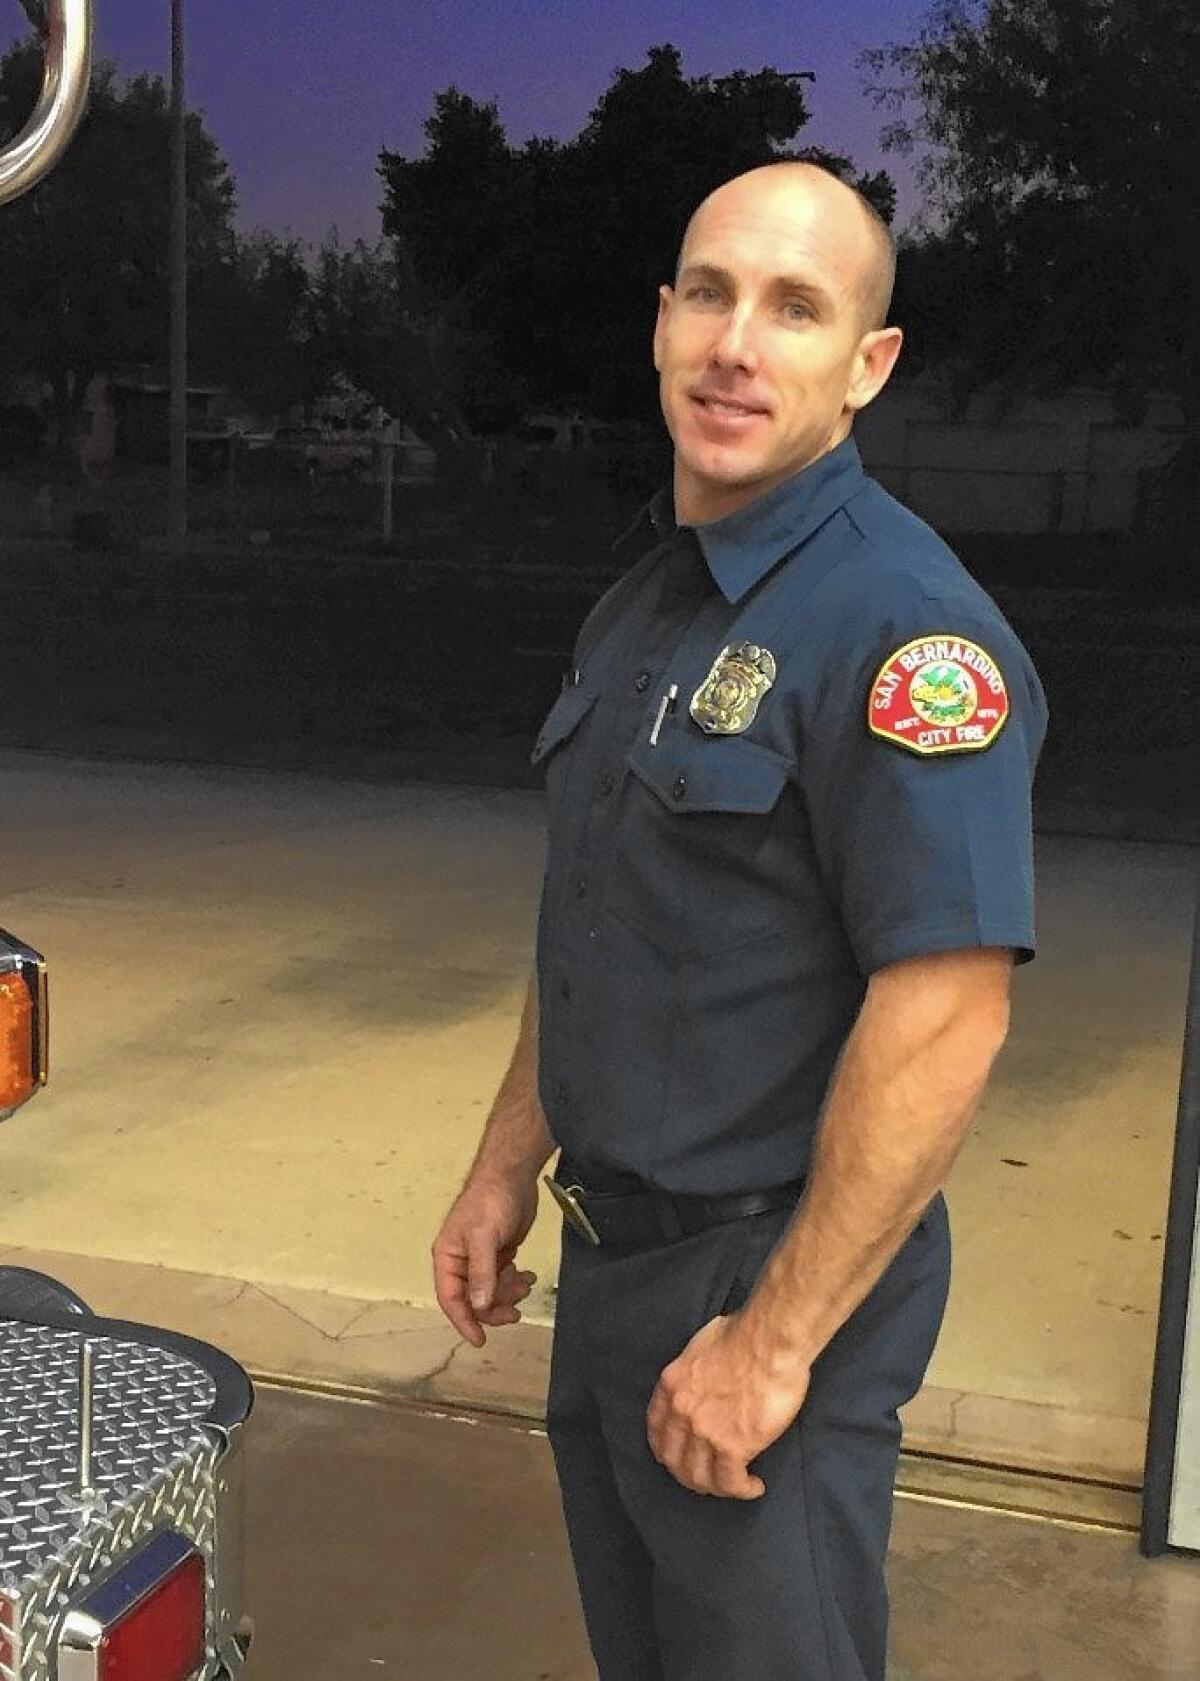 Ryan Starling, a paramedic with the San Bernardino Fire Department and the city's SWAT team, fell back on his training to get through the grim job on the day of the San Bernardino shootings.